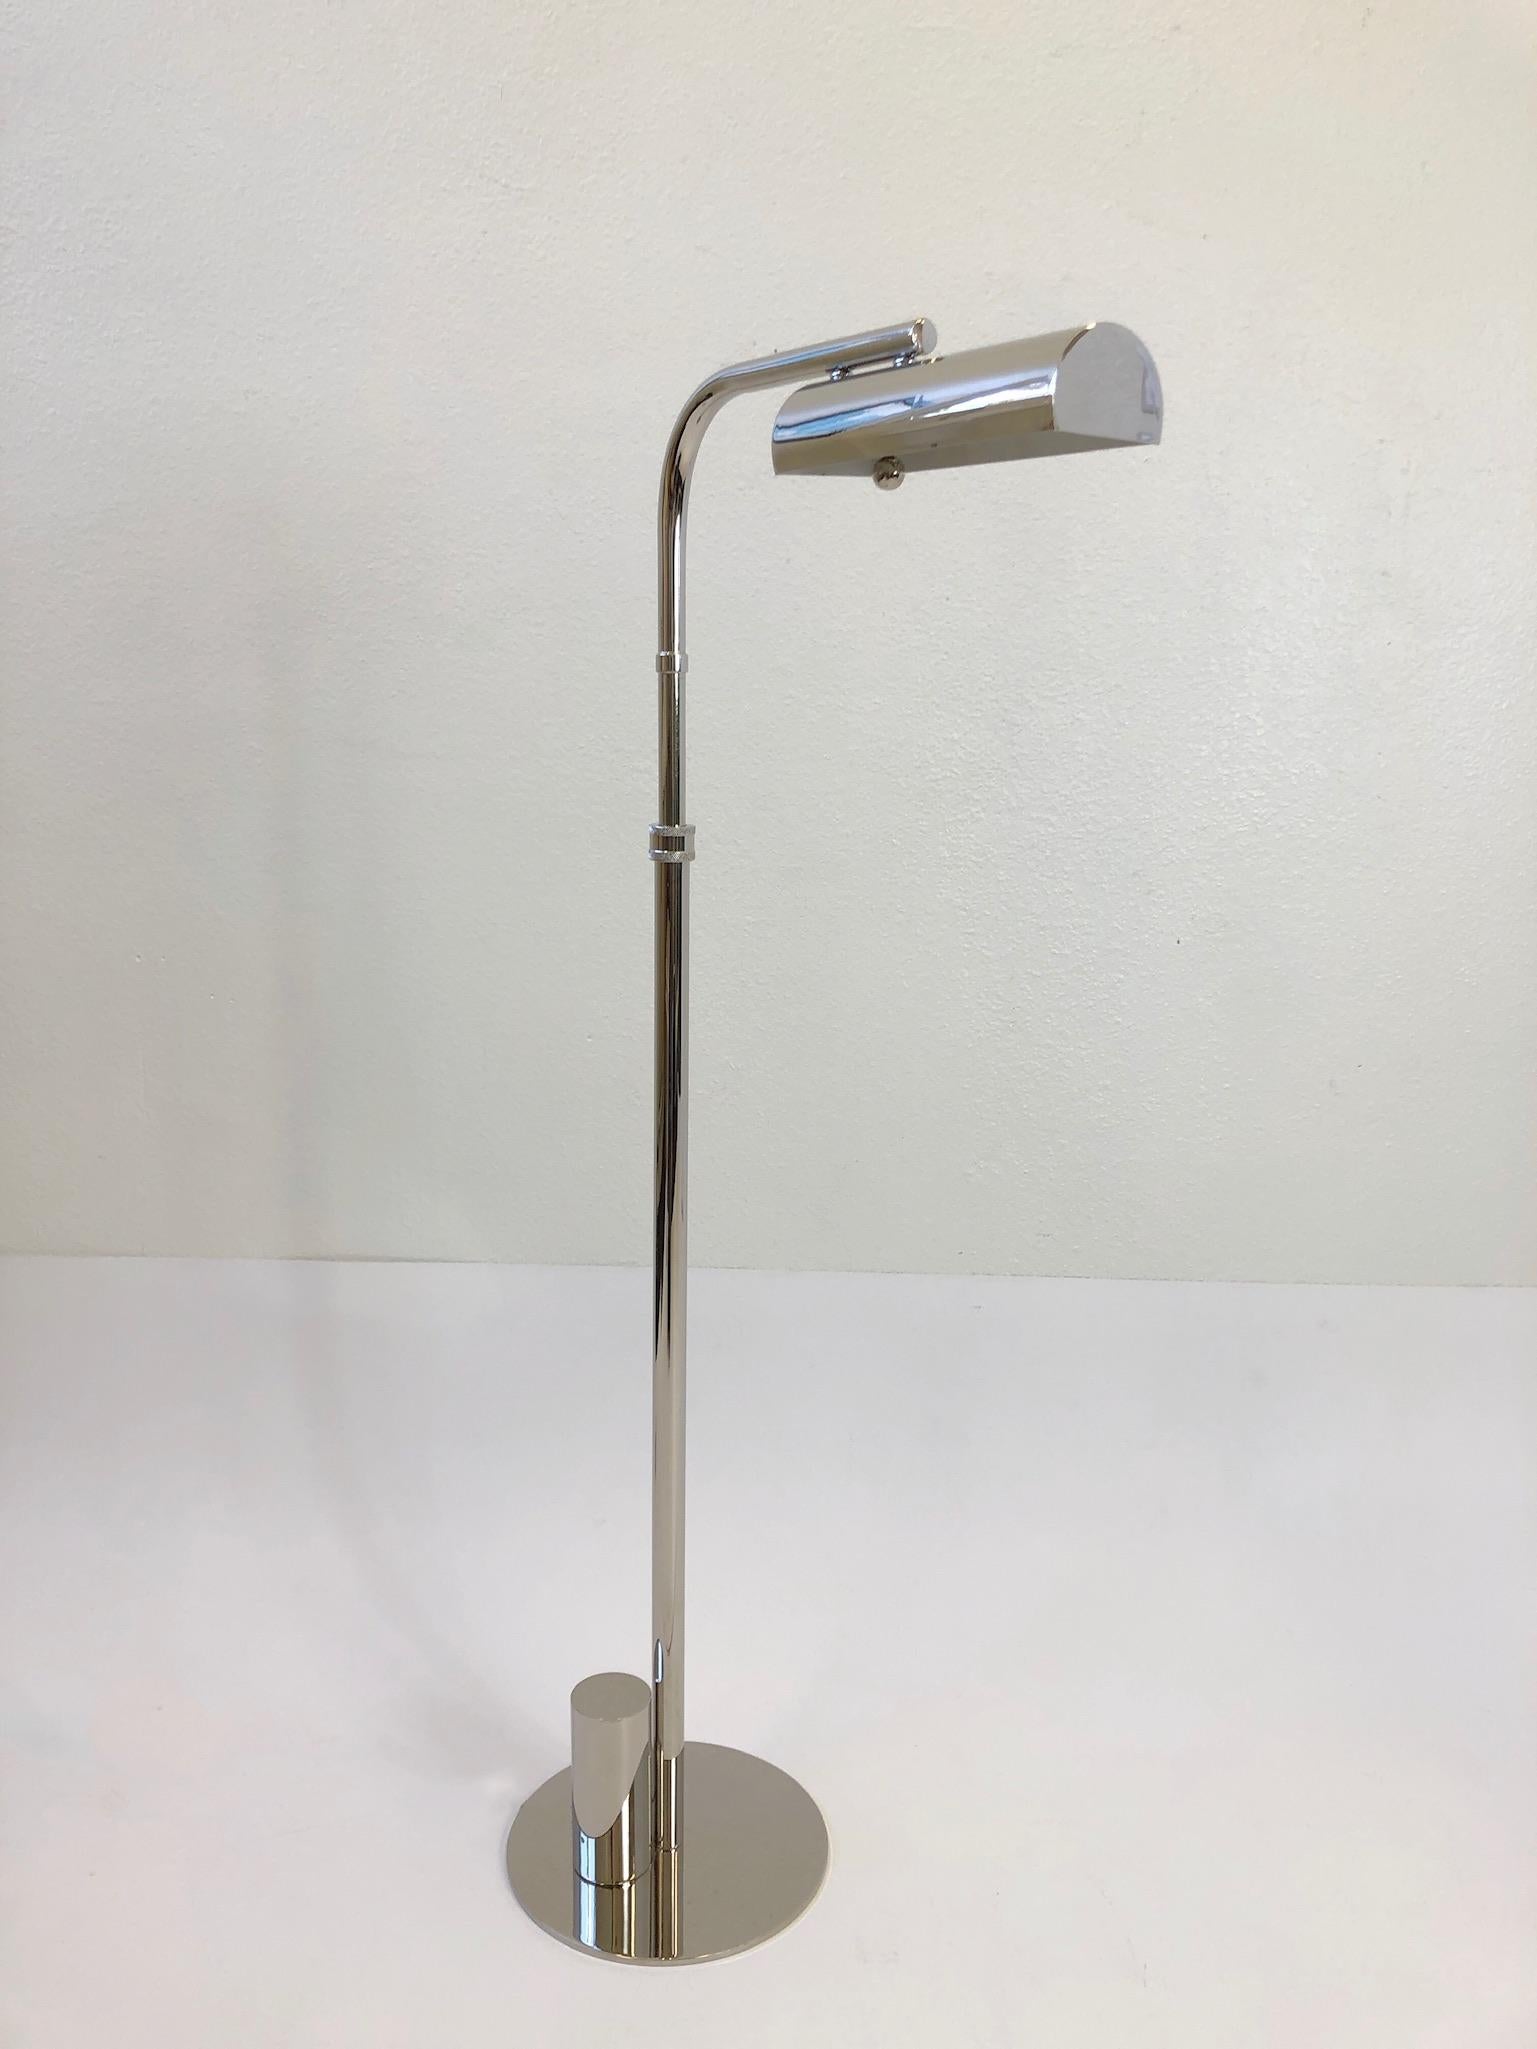 A glamorous pair of polish nickel “Ball Line” floor lamps design in the 1970s by Charles Hollis Jones. The lamps are signed by CHJ. The lamps have been newly replated and rewired with a full range dimmer. The lamps are adjustable they rotate 360*